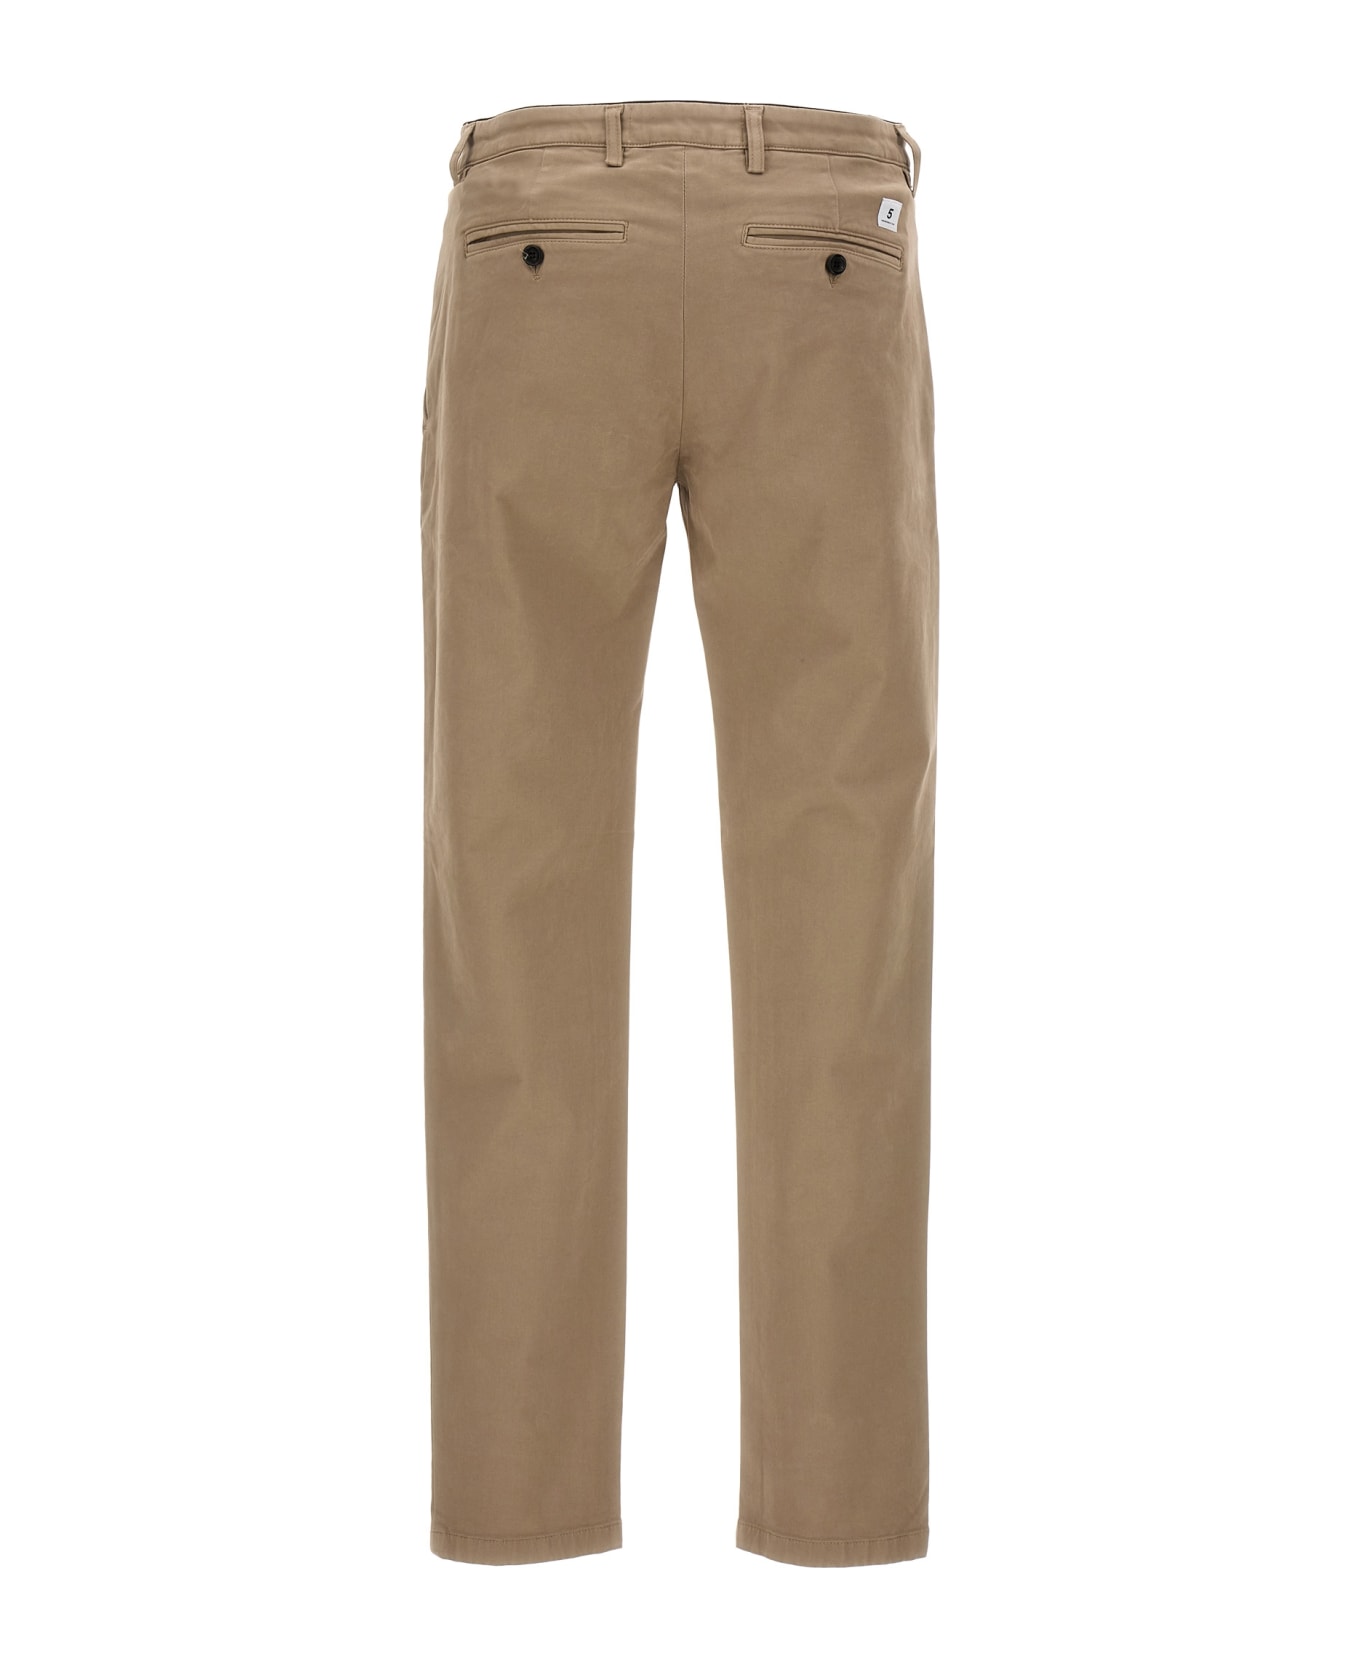 Department Five 'mike' Pants - Beige ボトムス